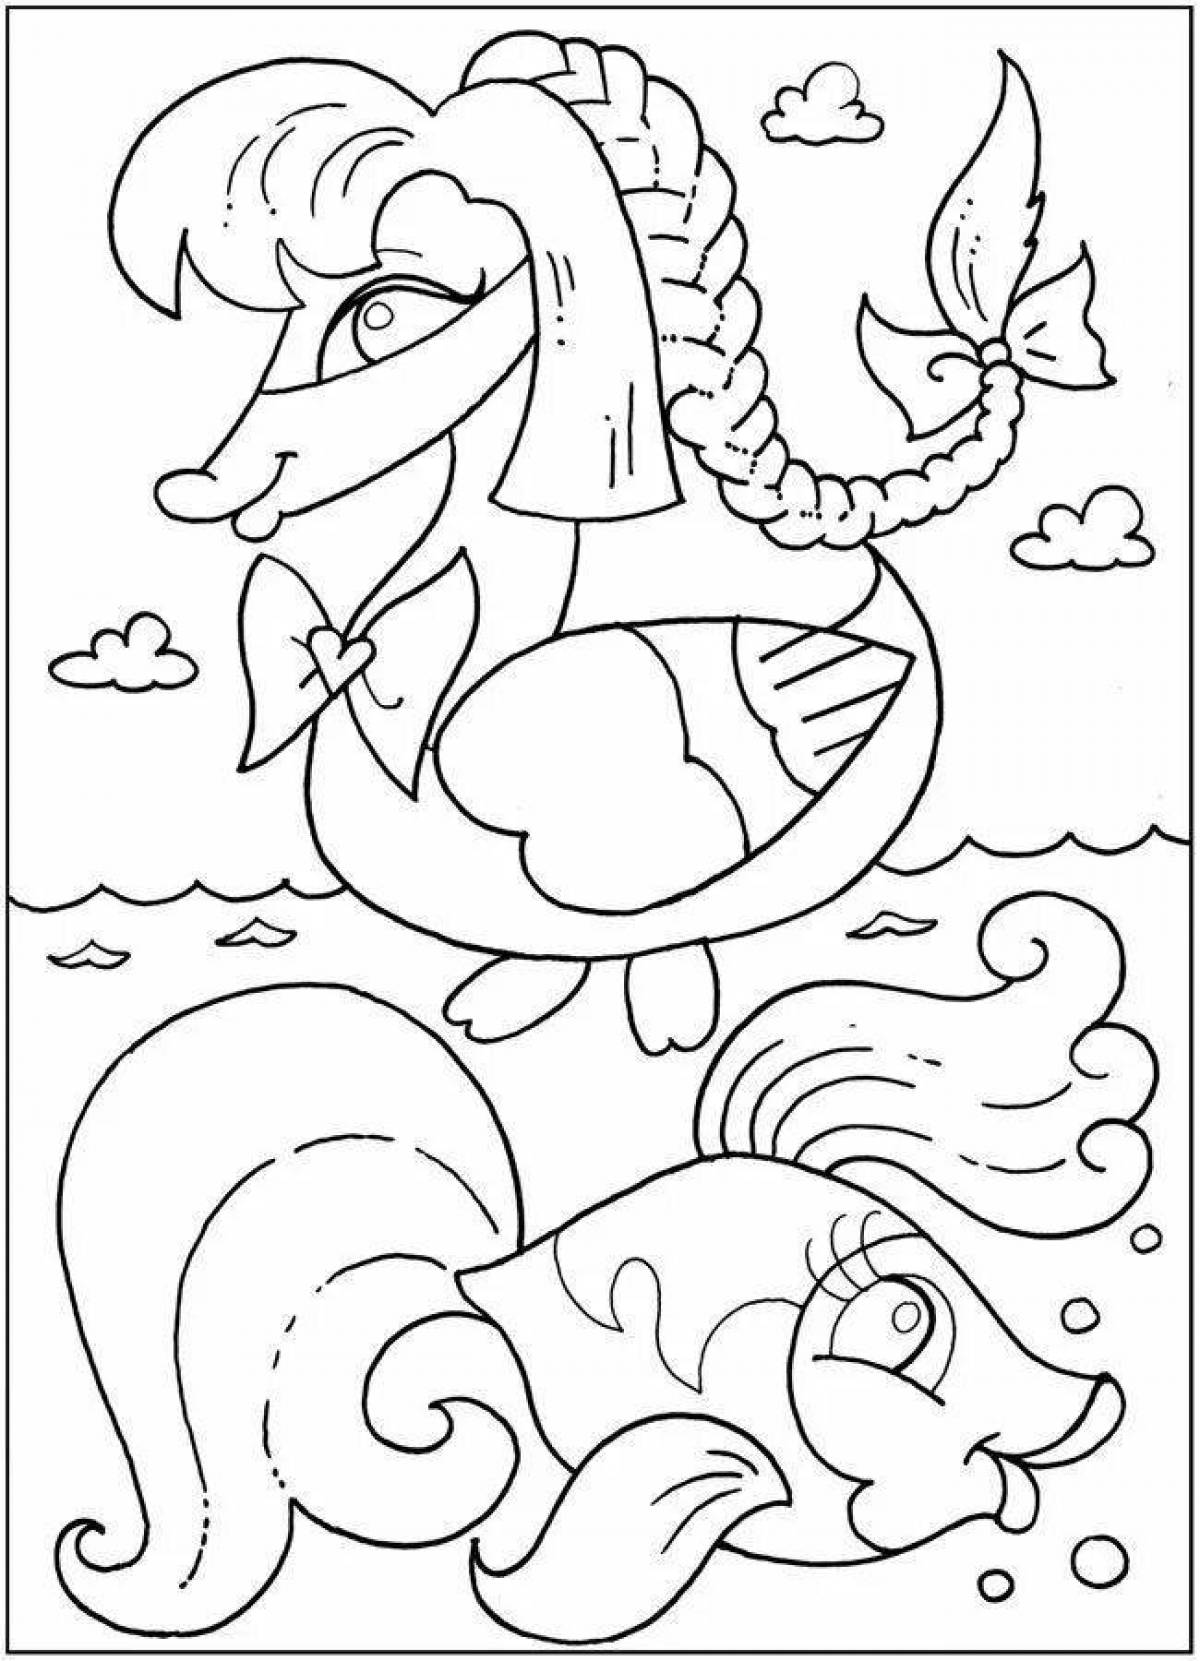 Delightful coloring book based on Pushkin's fairy tales for preschoolers